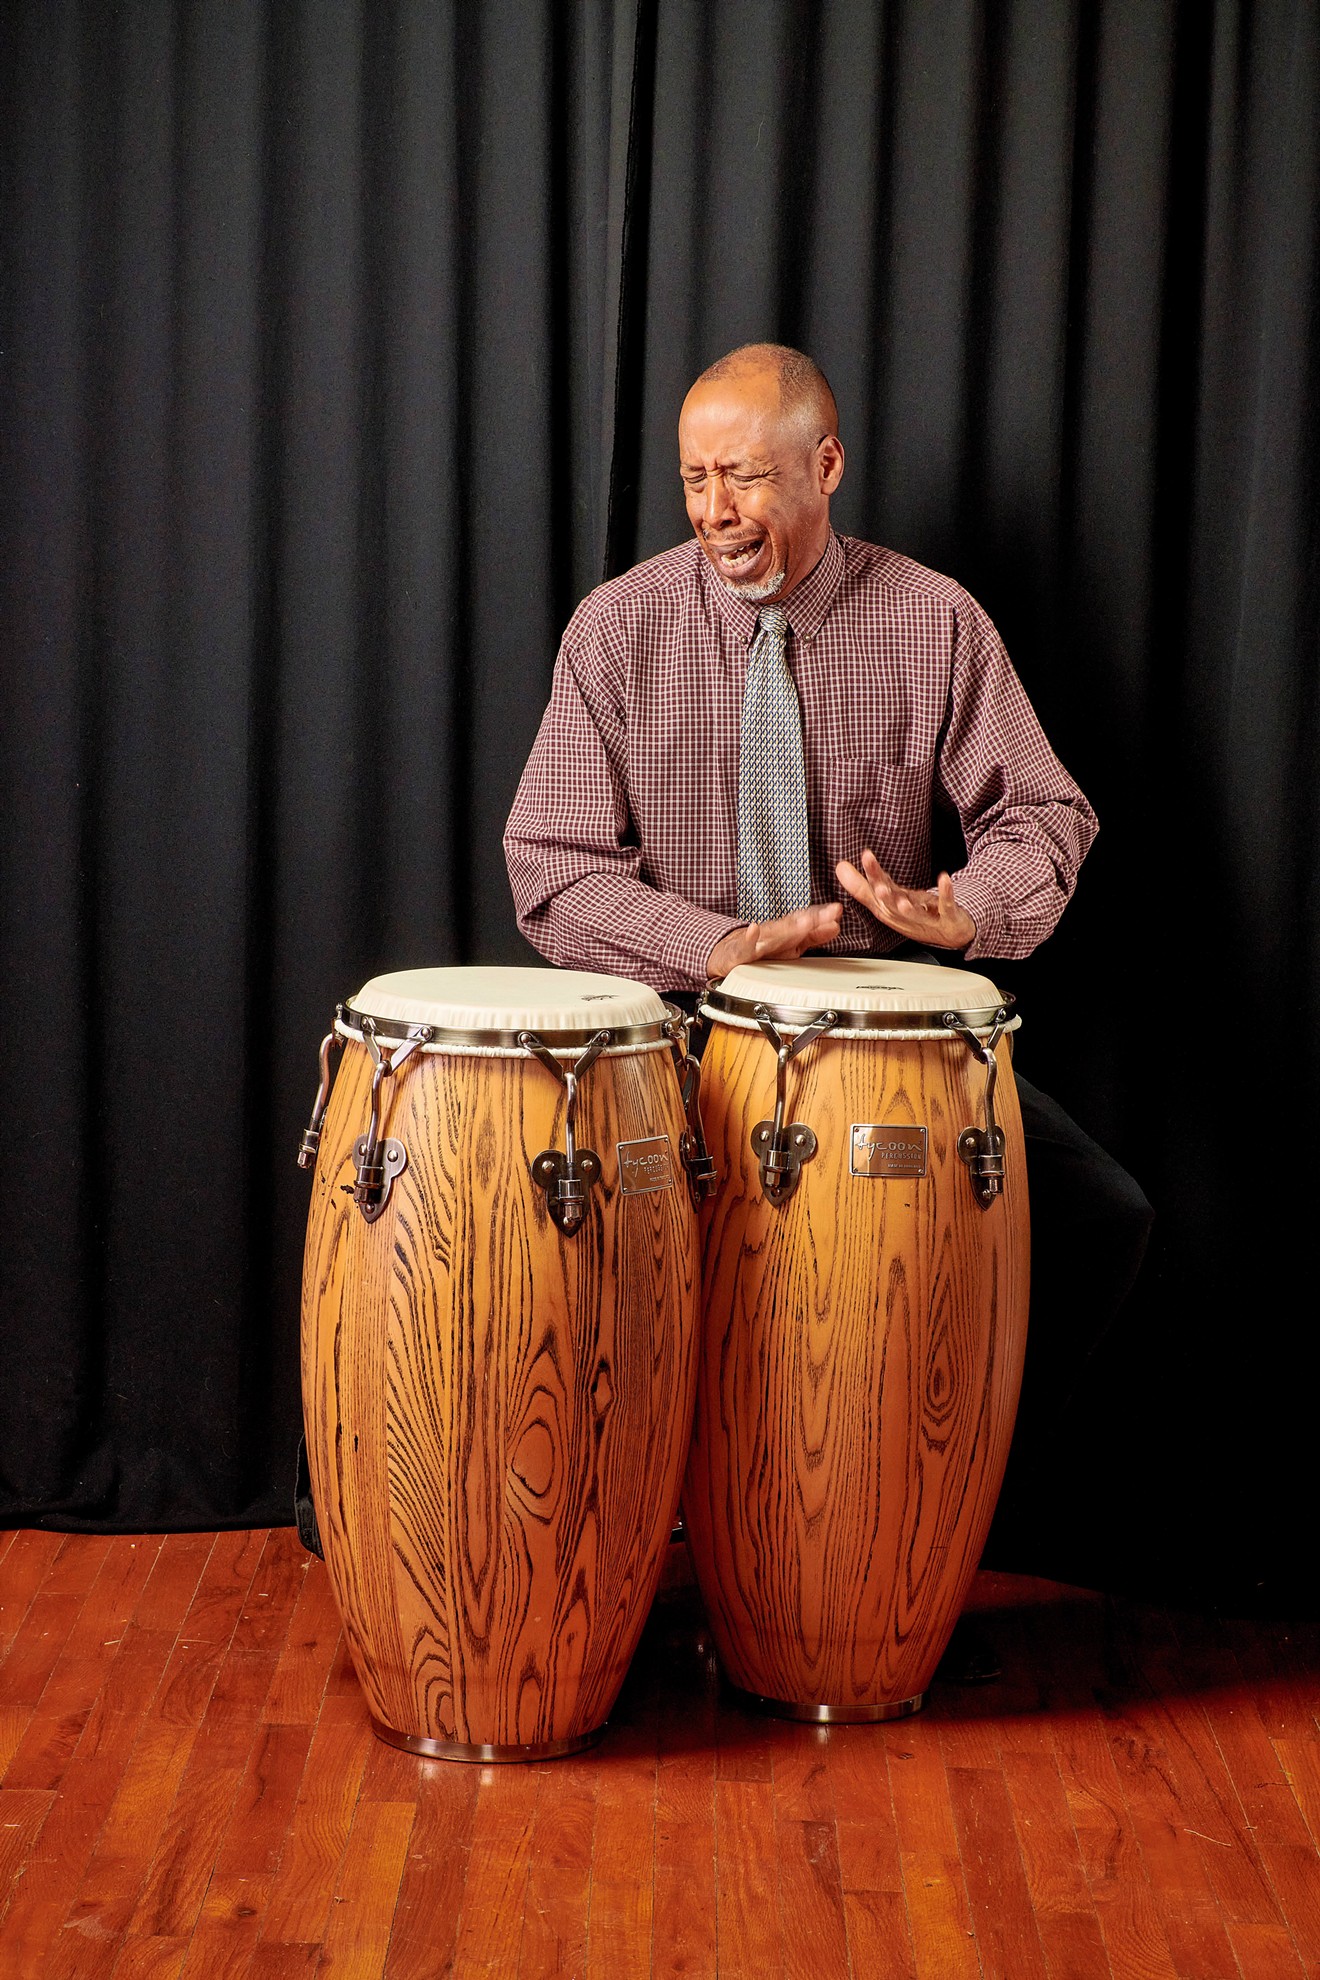 Percussion king Terry “Doc” Handy infuses Latin jazz and R&B into his sounds during a live performance. Catch Doc Handy this year at the Savannah Jazz Festival.